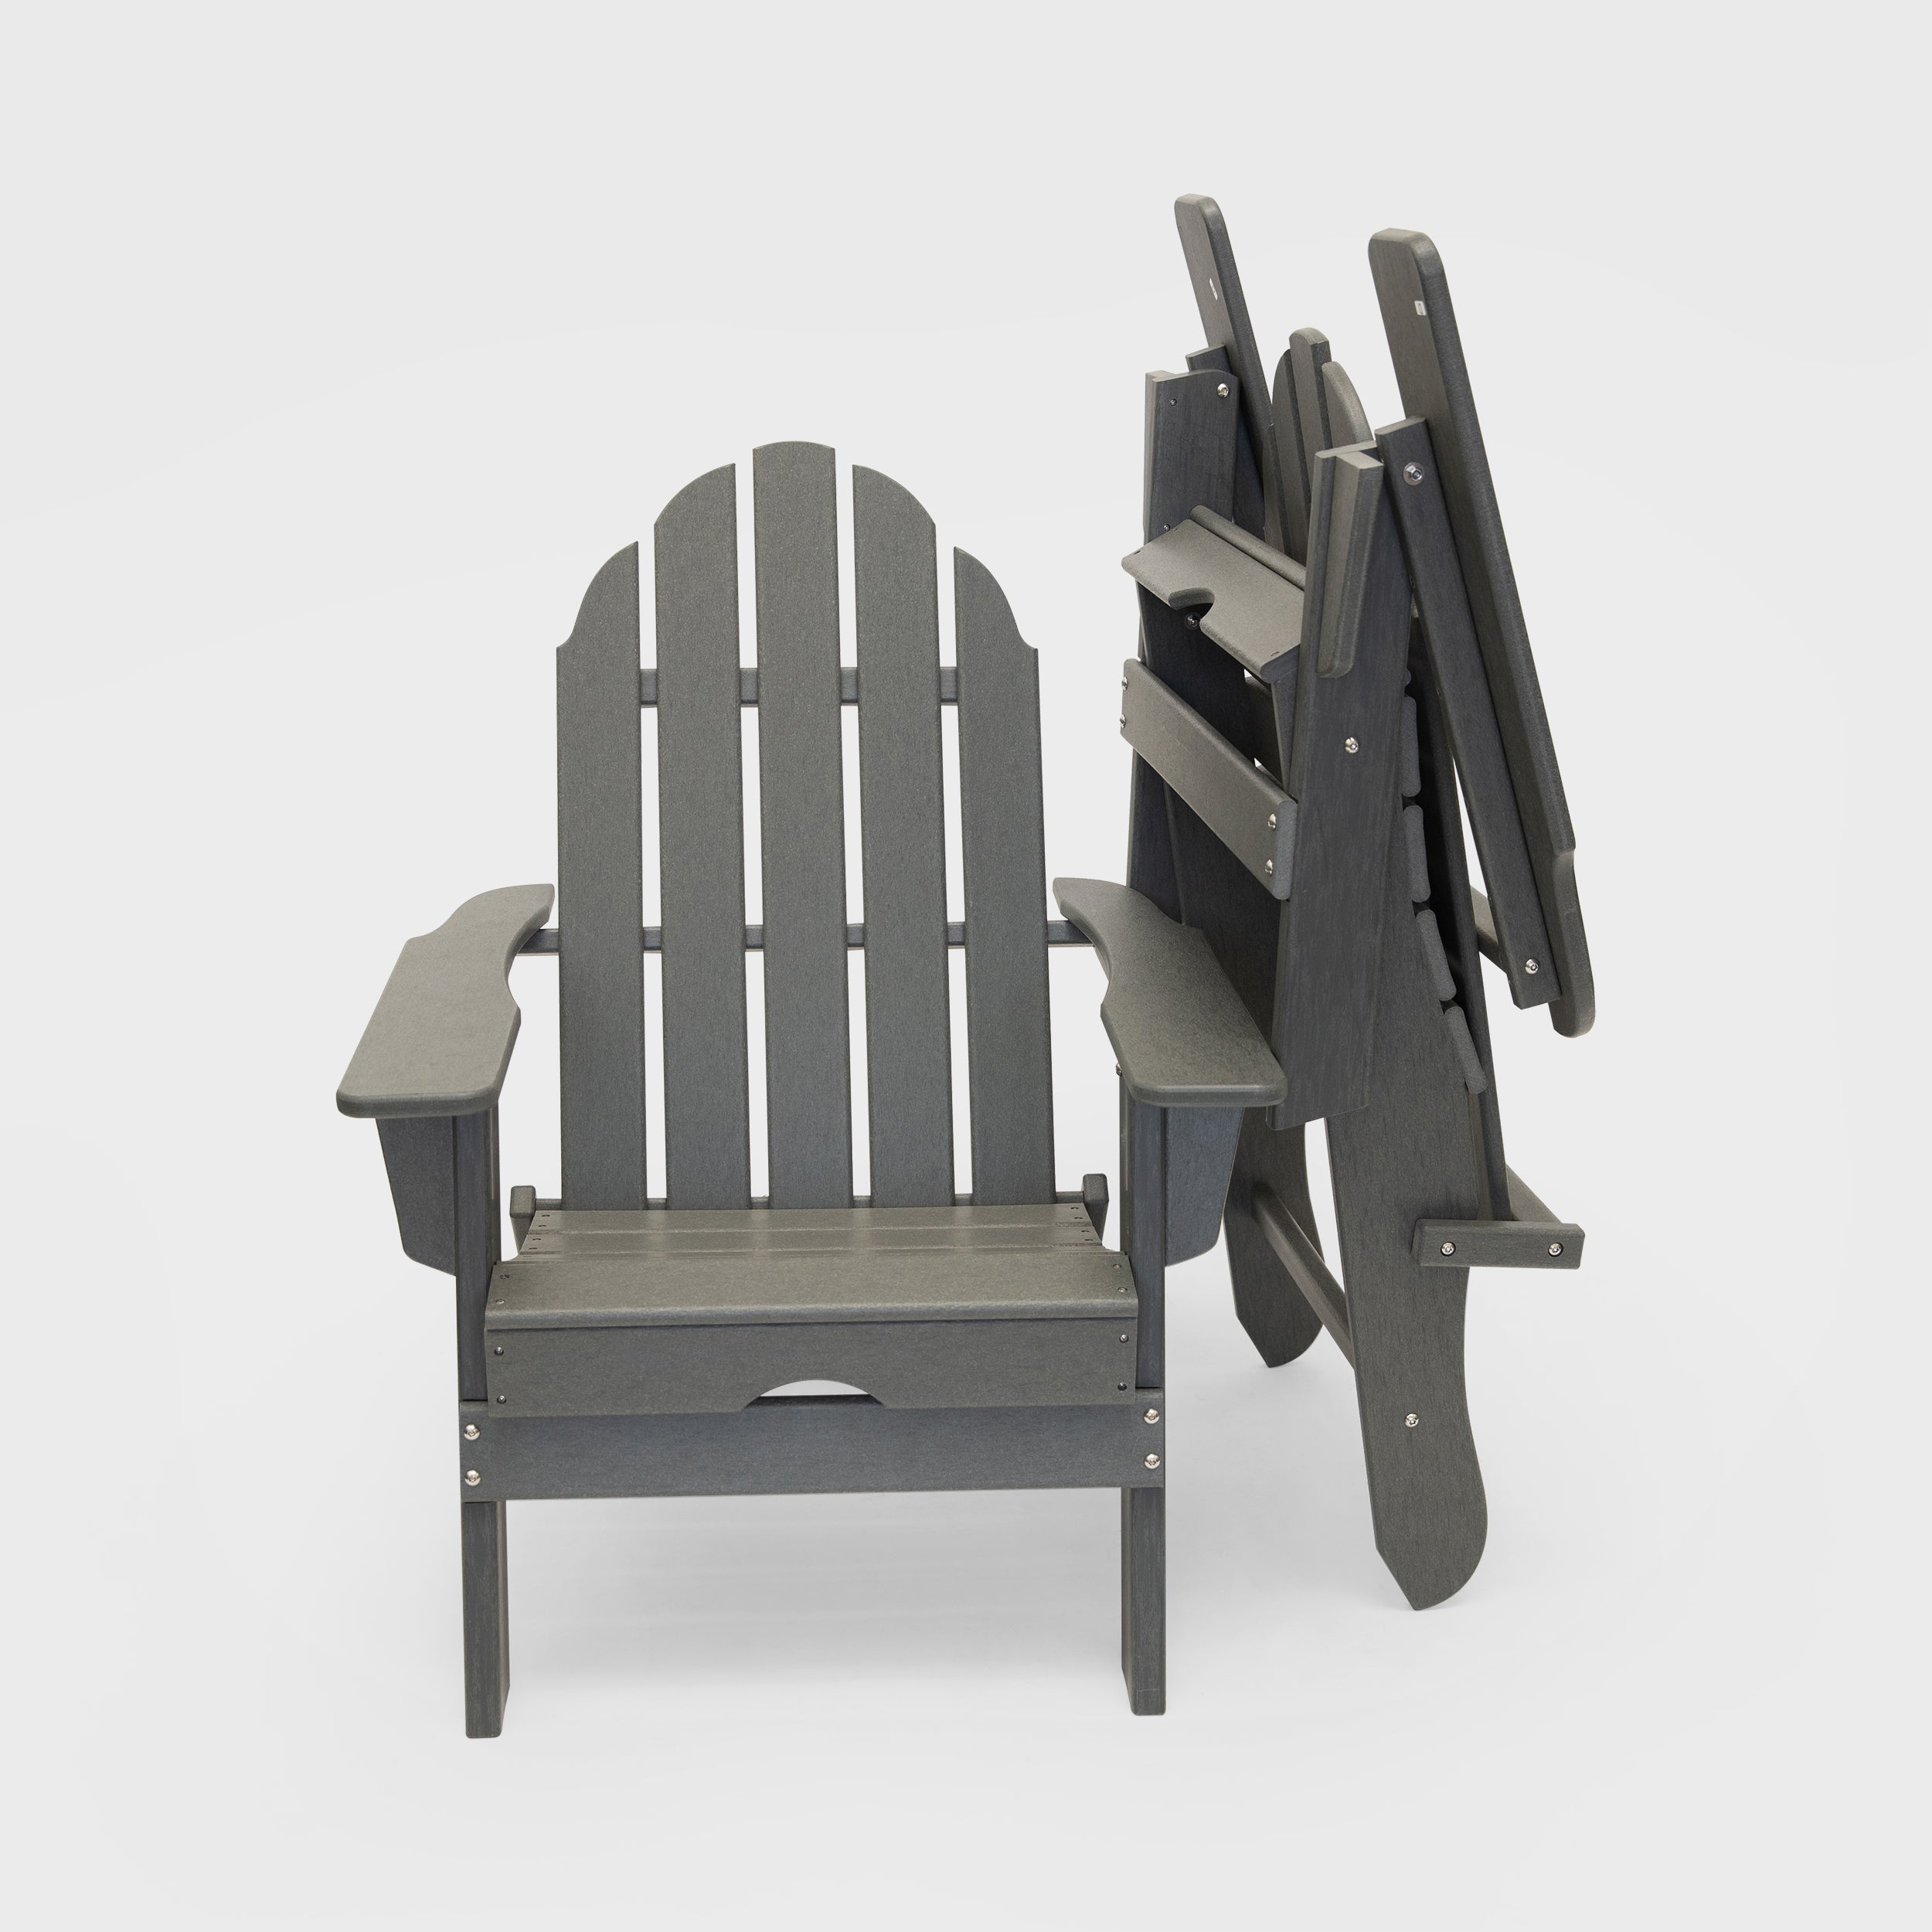 Balboa HDPE Recycled Plastic Folding Adirondack Chair and Table Set (3-Piece)